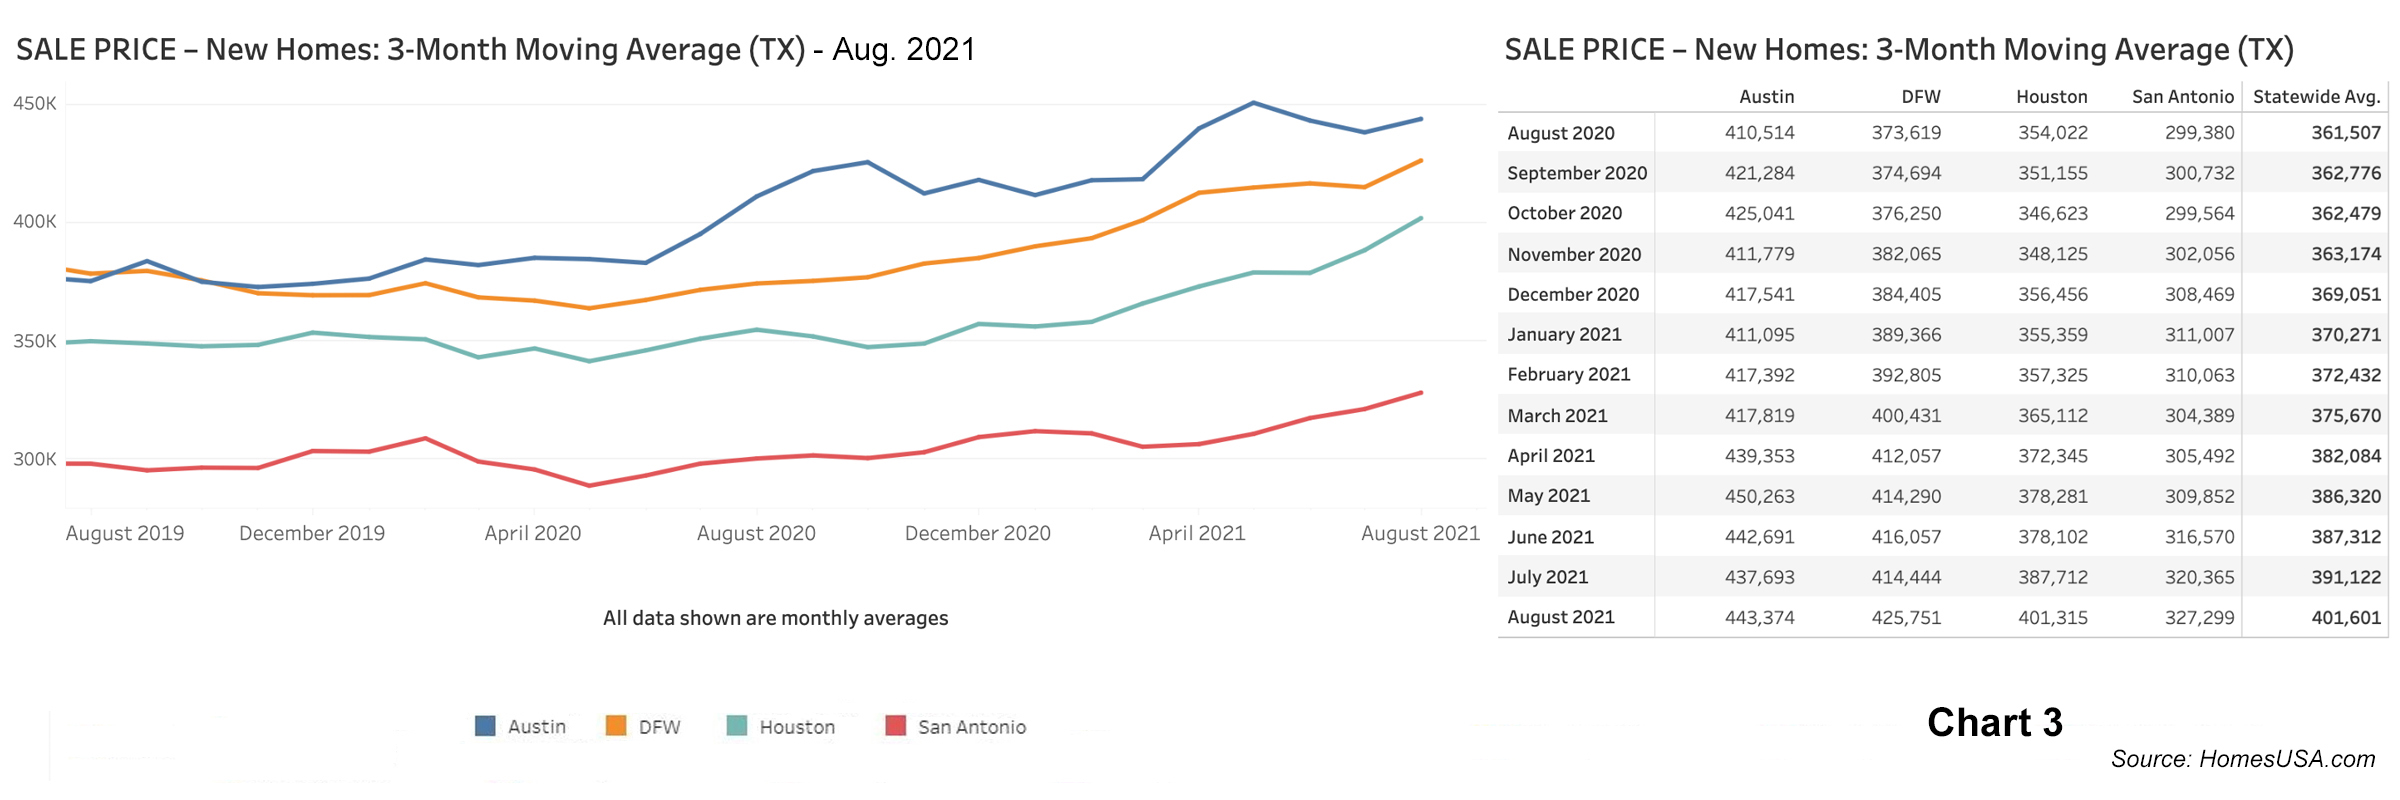 Chart 3: Texas New Home Sales Prices – August 2021